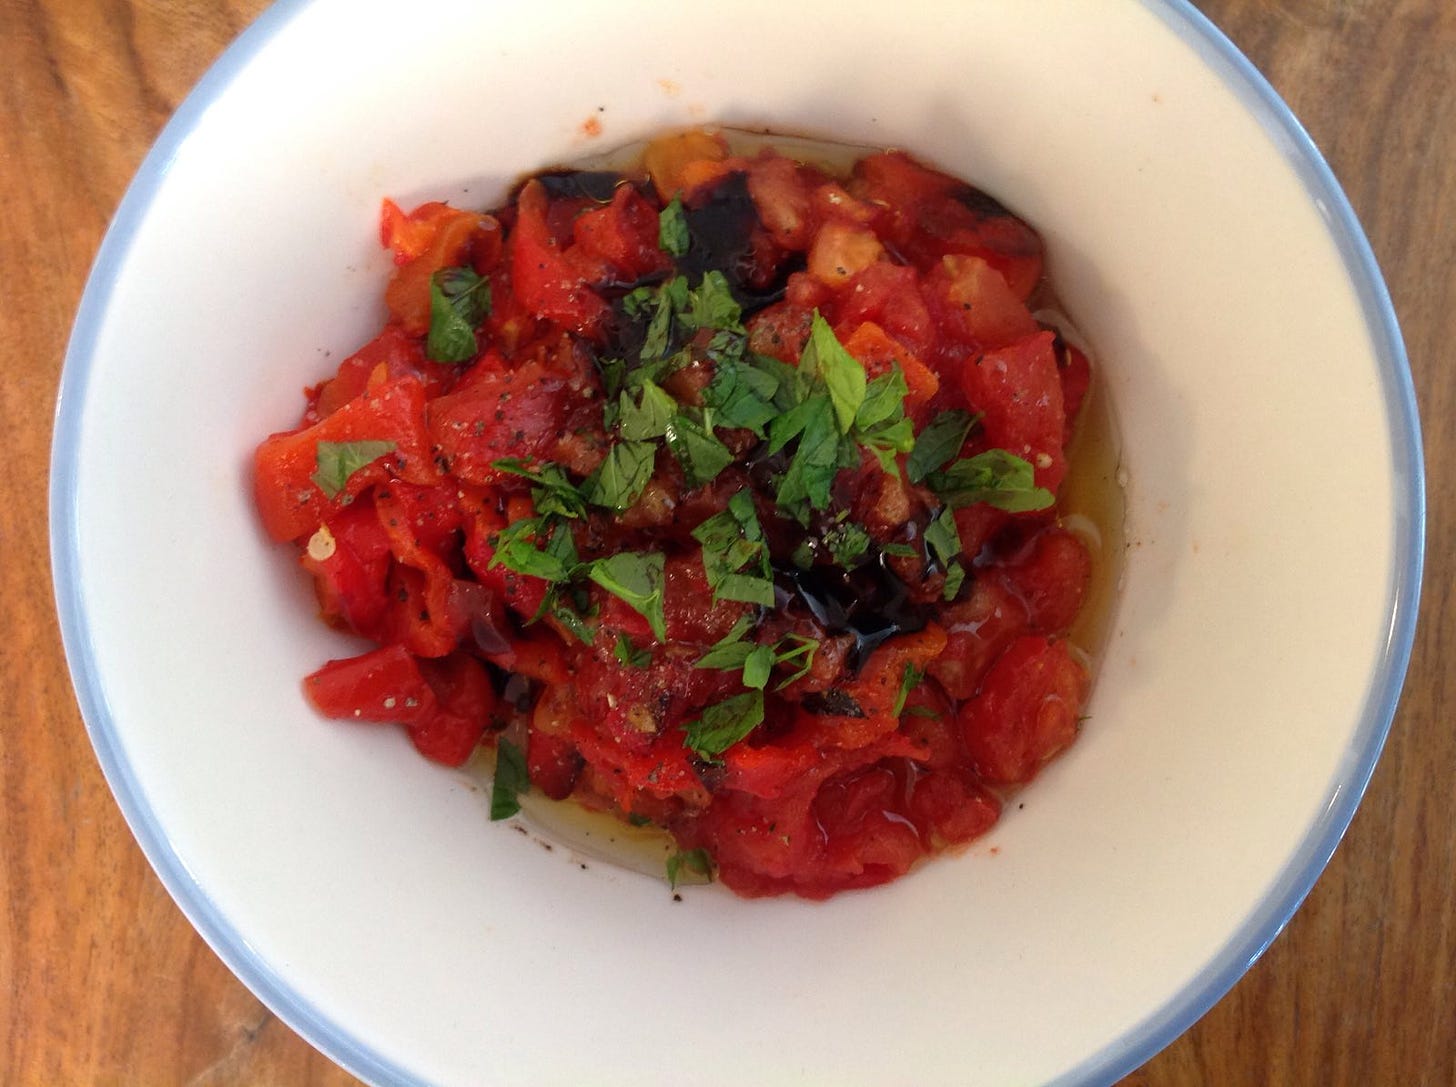 Roast red peppers & tomato topping